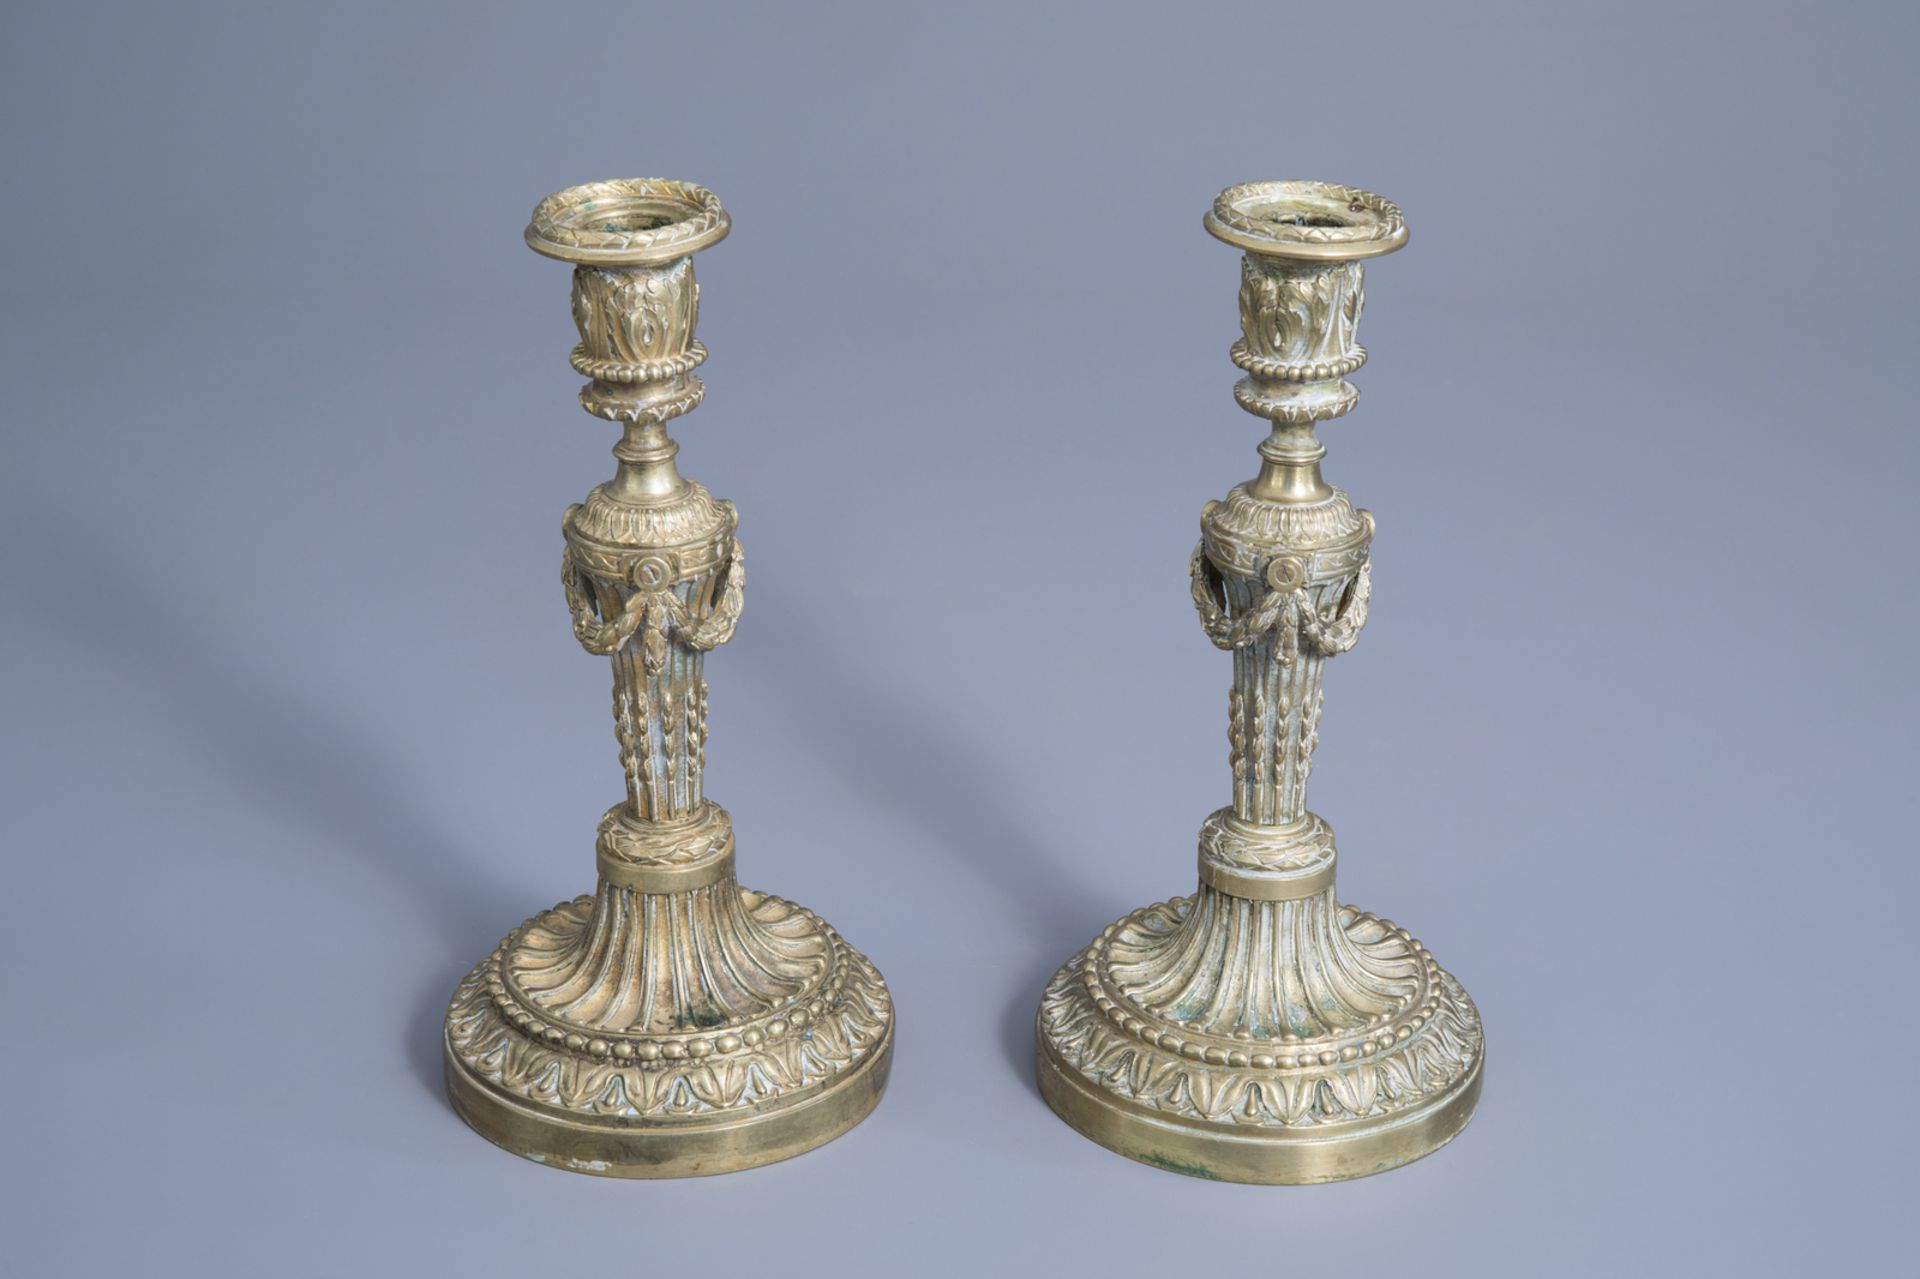 A pair of French Neoclassical bronze candlesticks with acanthus leaves and garlands, 18th C. - Image 7 of 7